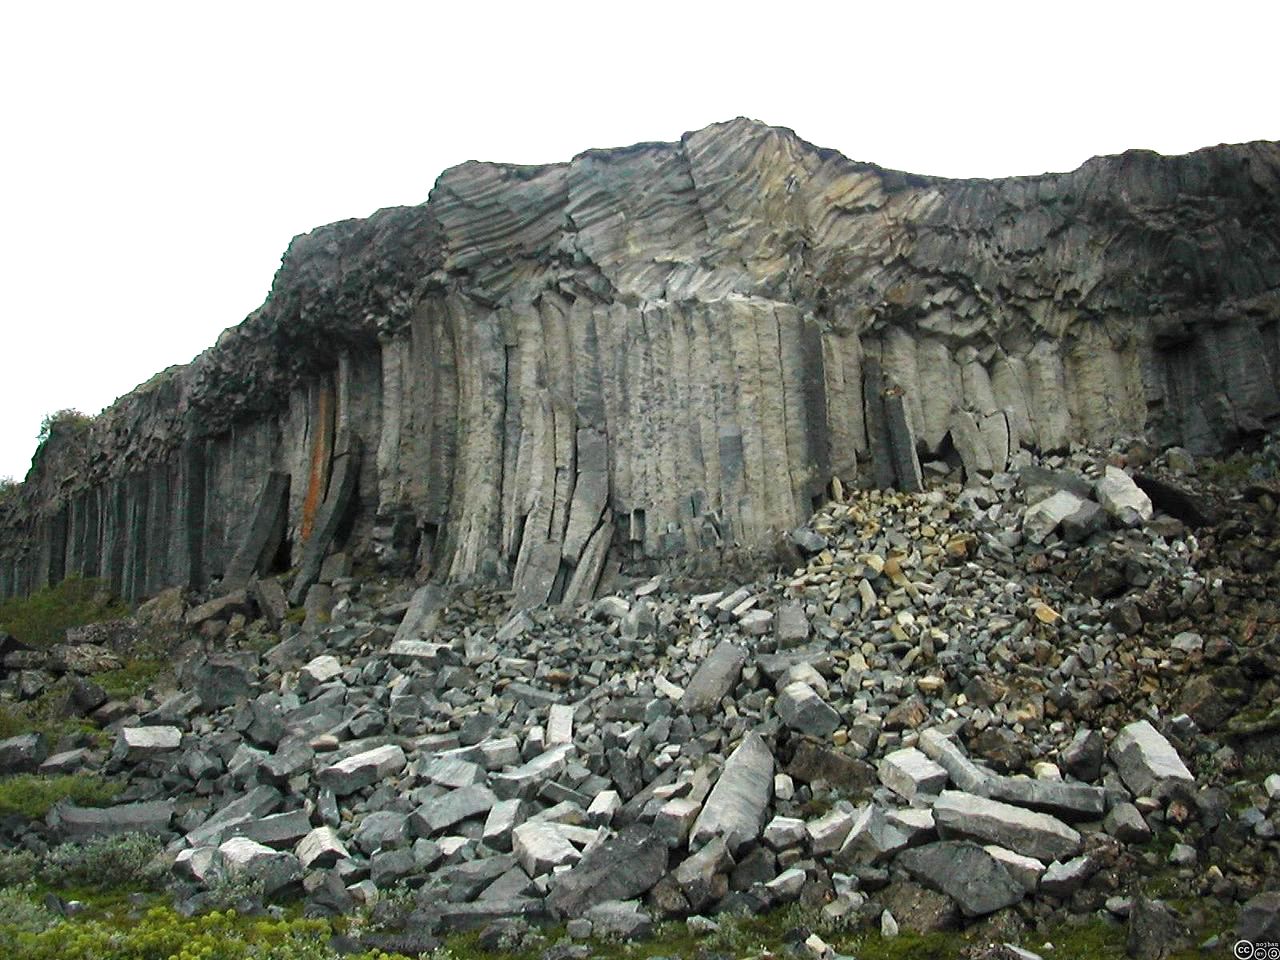 A cliff of basaltic columns with broken columns at the base.